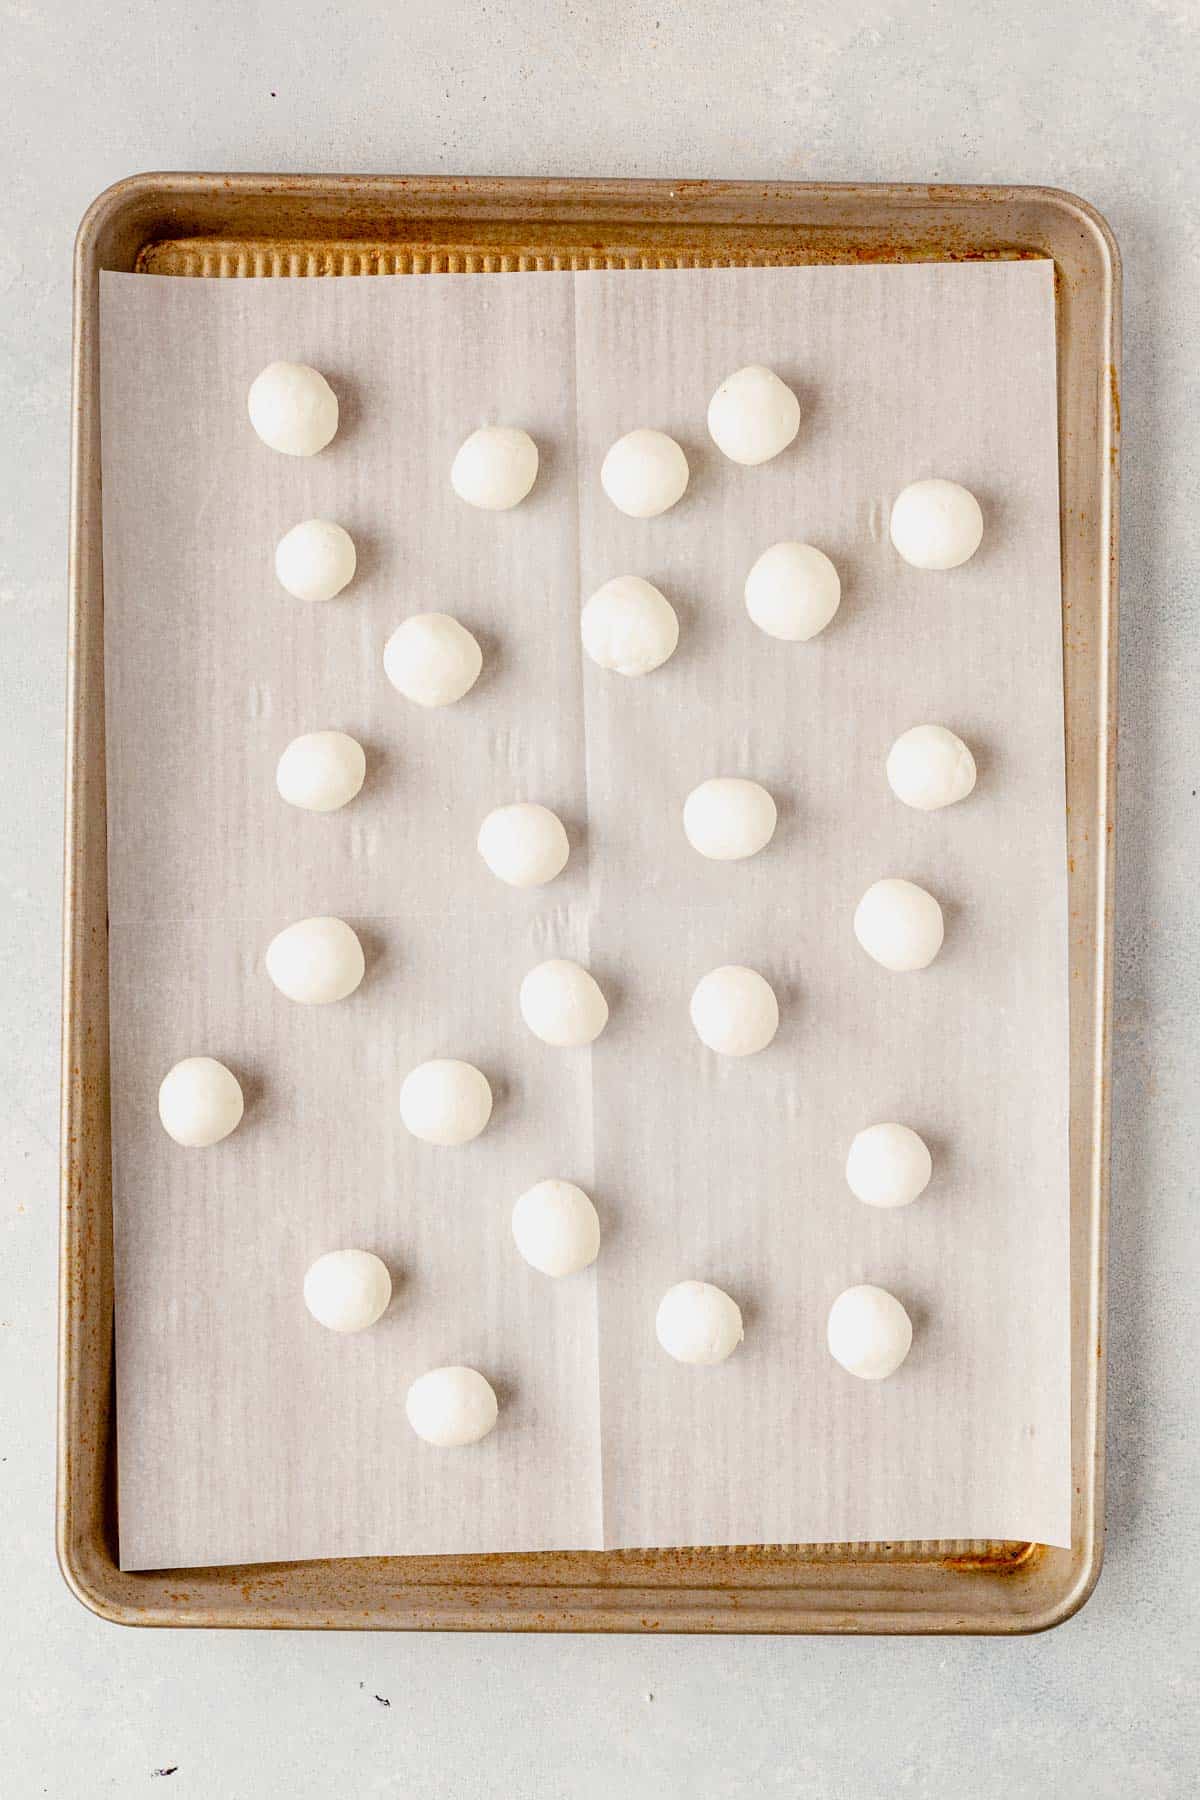 goat cheese balls on a parchment-lined baking sheet